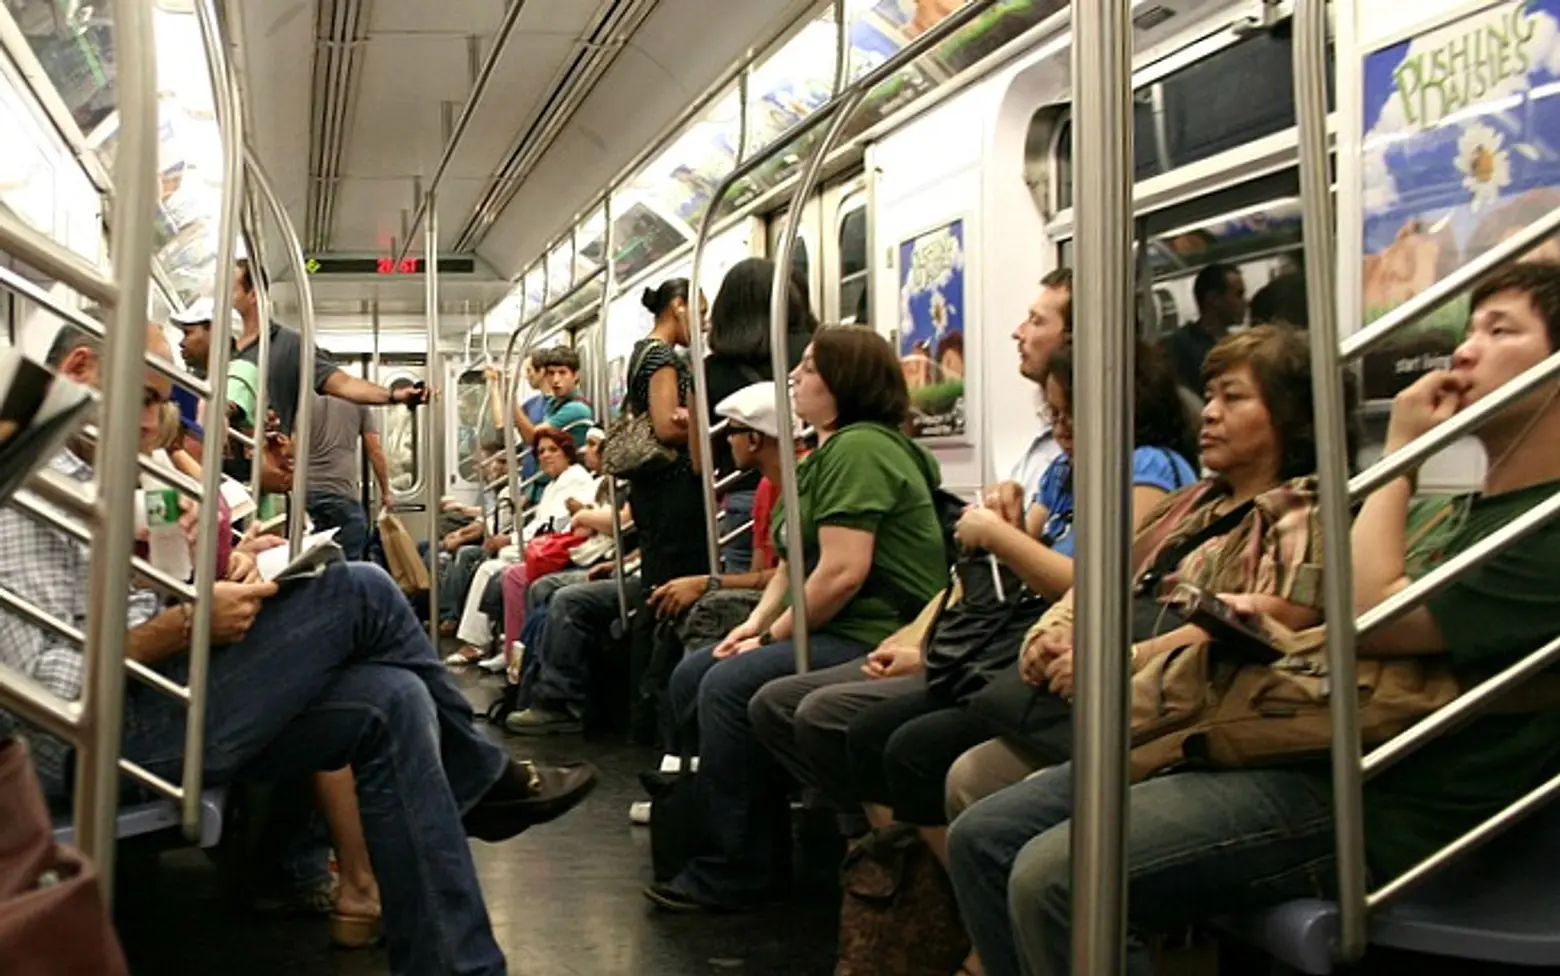 POLL: Would You Be Okay With the MTA Installing Audio Surveillance?